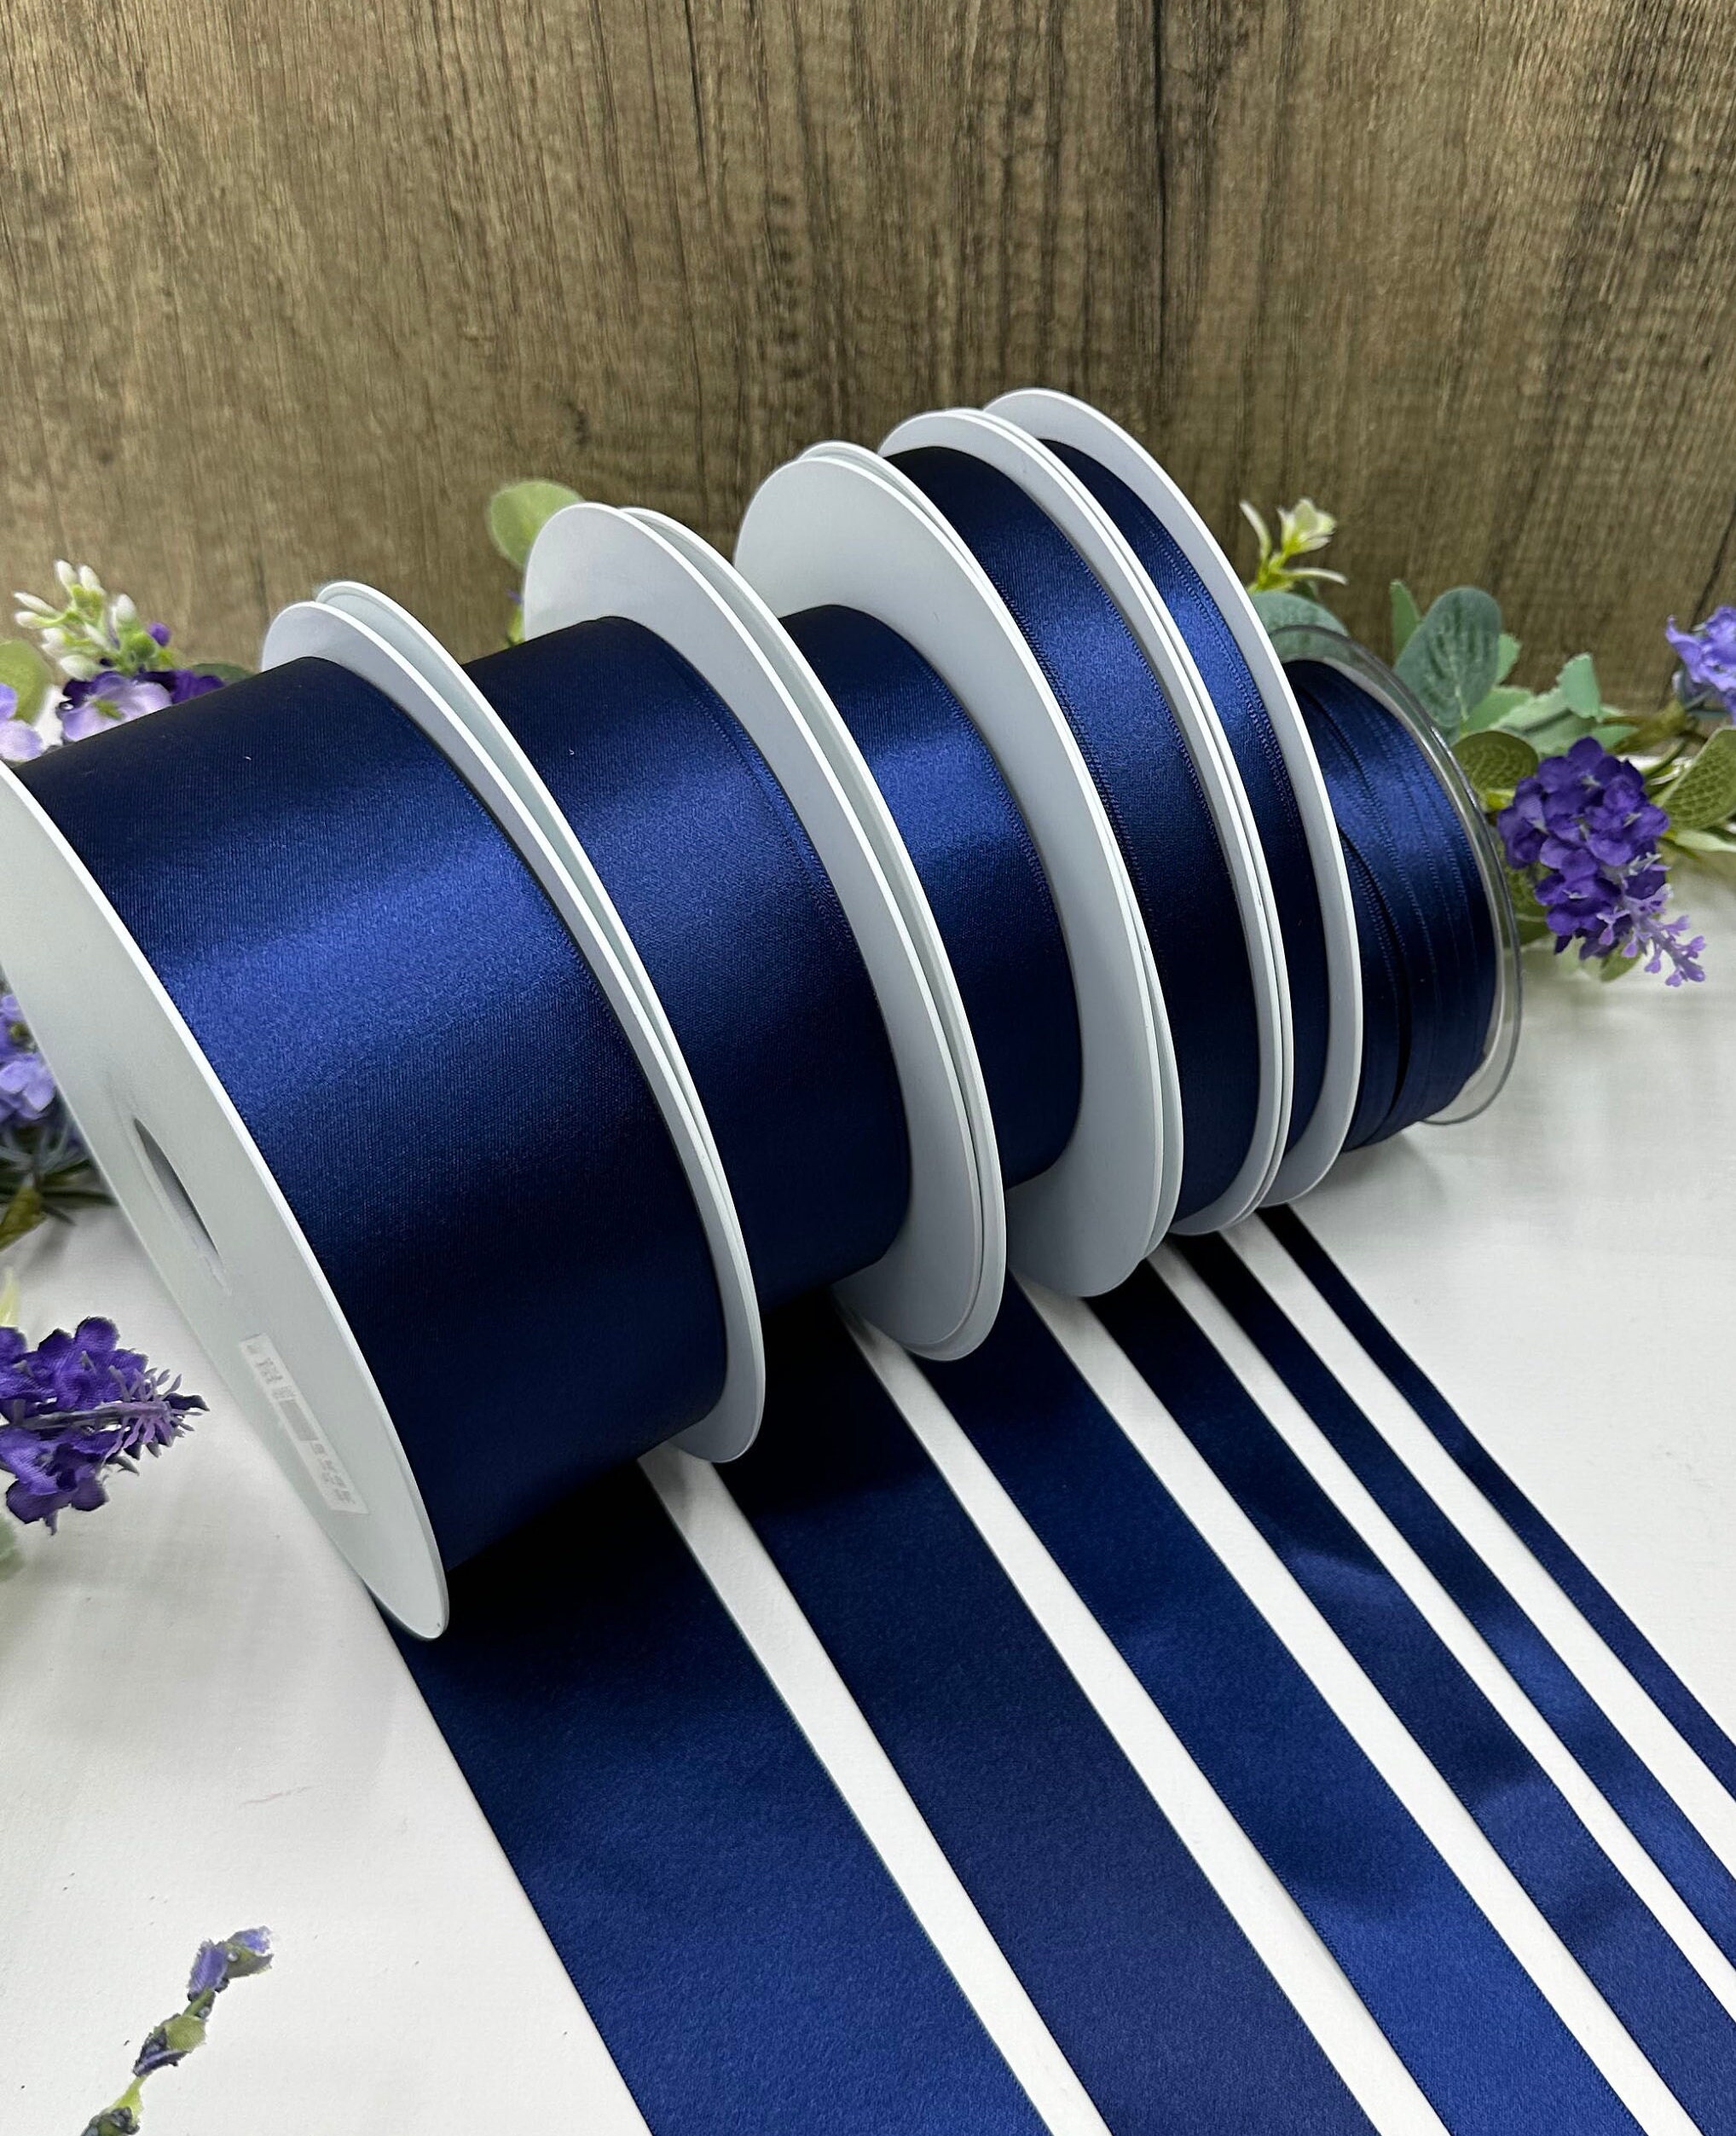  Navy Blue Wide Satin Ribbon for Gift Wrapping 1-1/2 inch,25  Yards Continuous Ribbons Roll,Christmas Gift Ribbon Thick Solid Color  Fabric Ribbon for Crafts,Wedding Car,Hair Bow Making,Wreath,Bouquet :  Health & Household